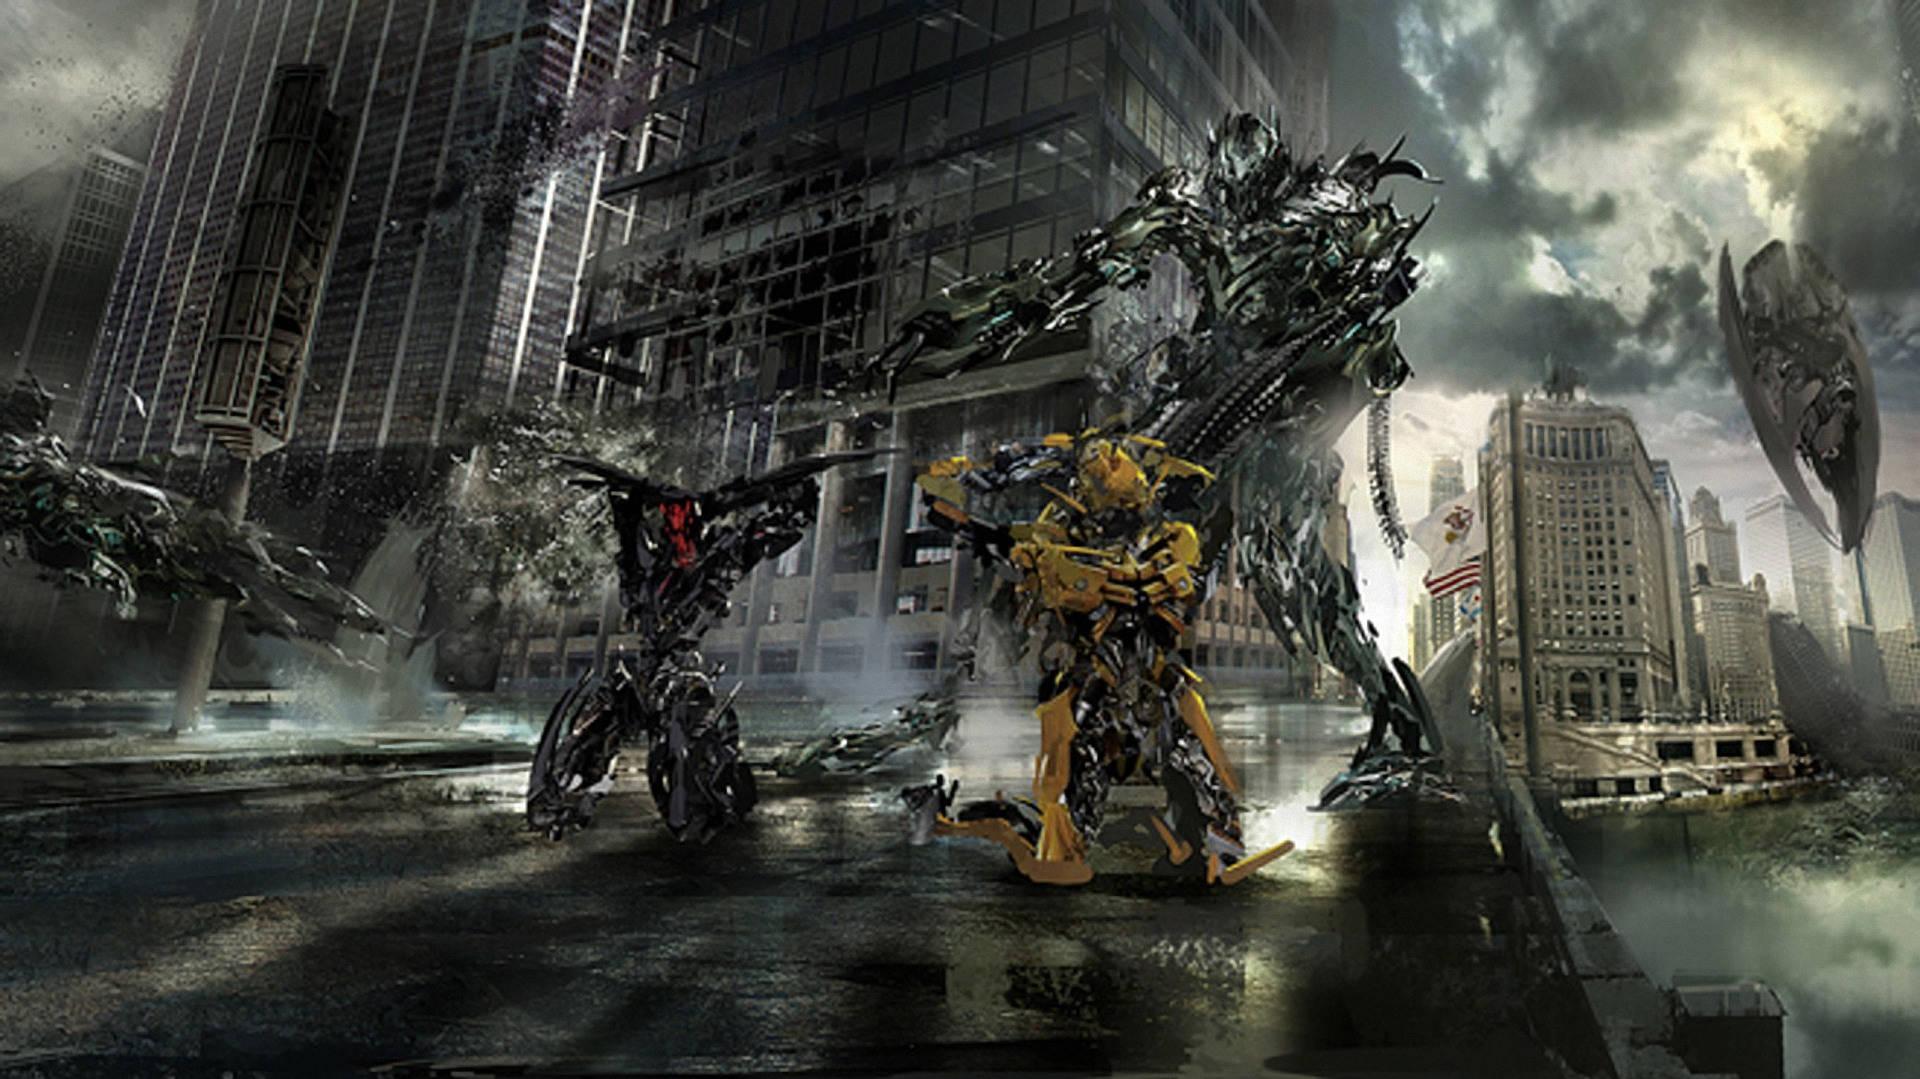 Download Transformers Megatron And Bumblebee Wallpaper